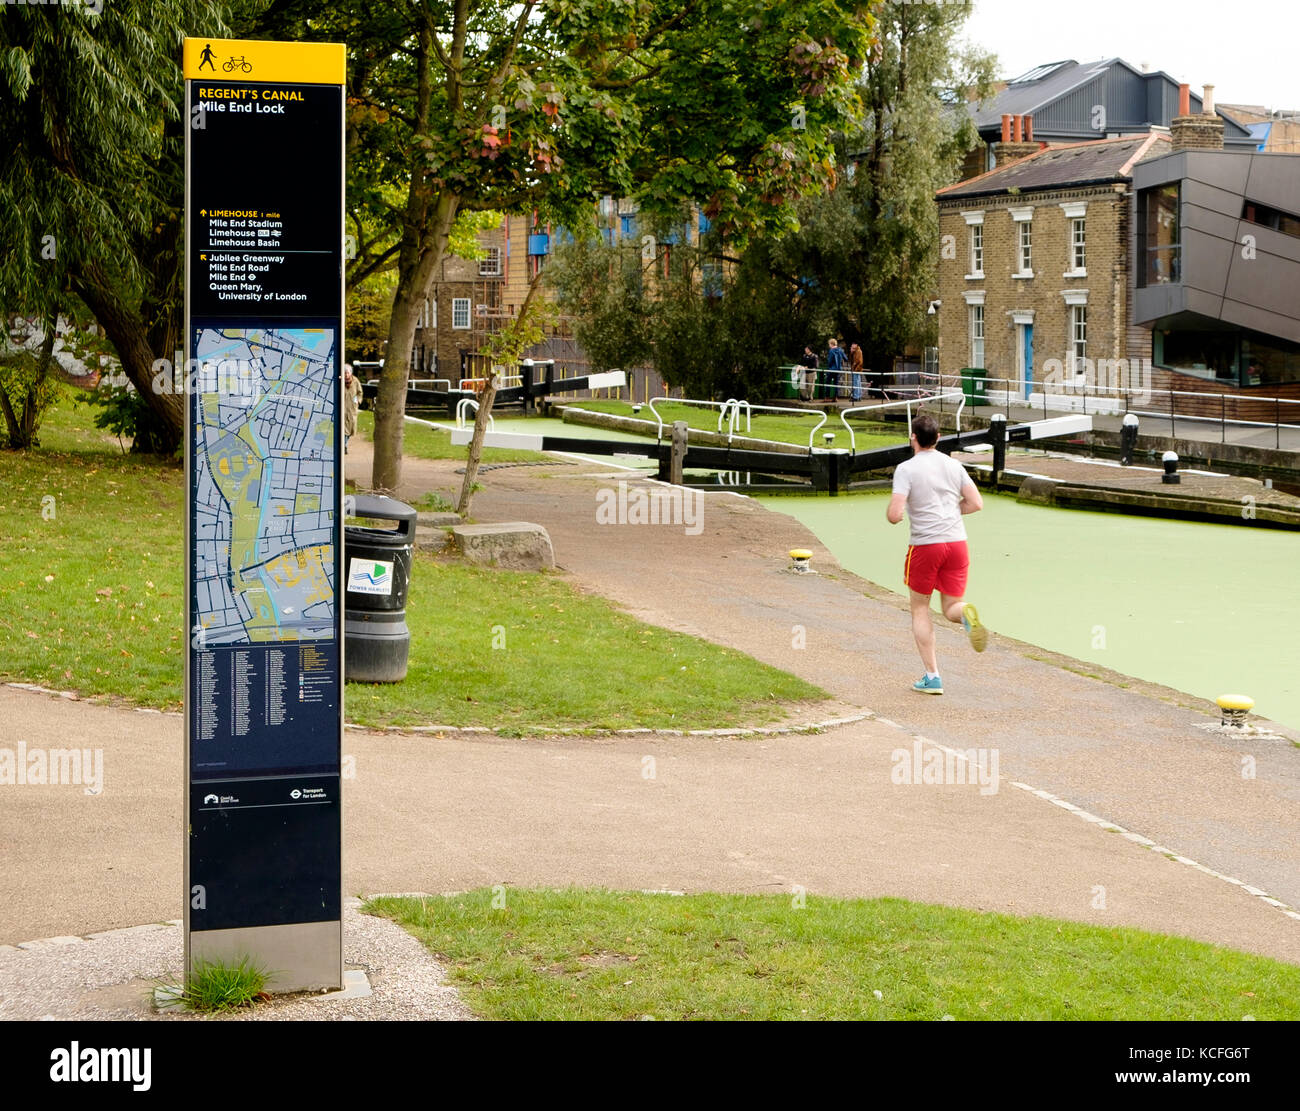 A jogger runs on the towpath passing a Legible London column street sign at Mile End Lock on the Regents Canal, London Stock Photo